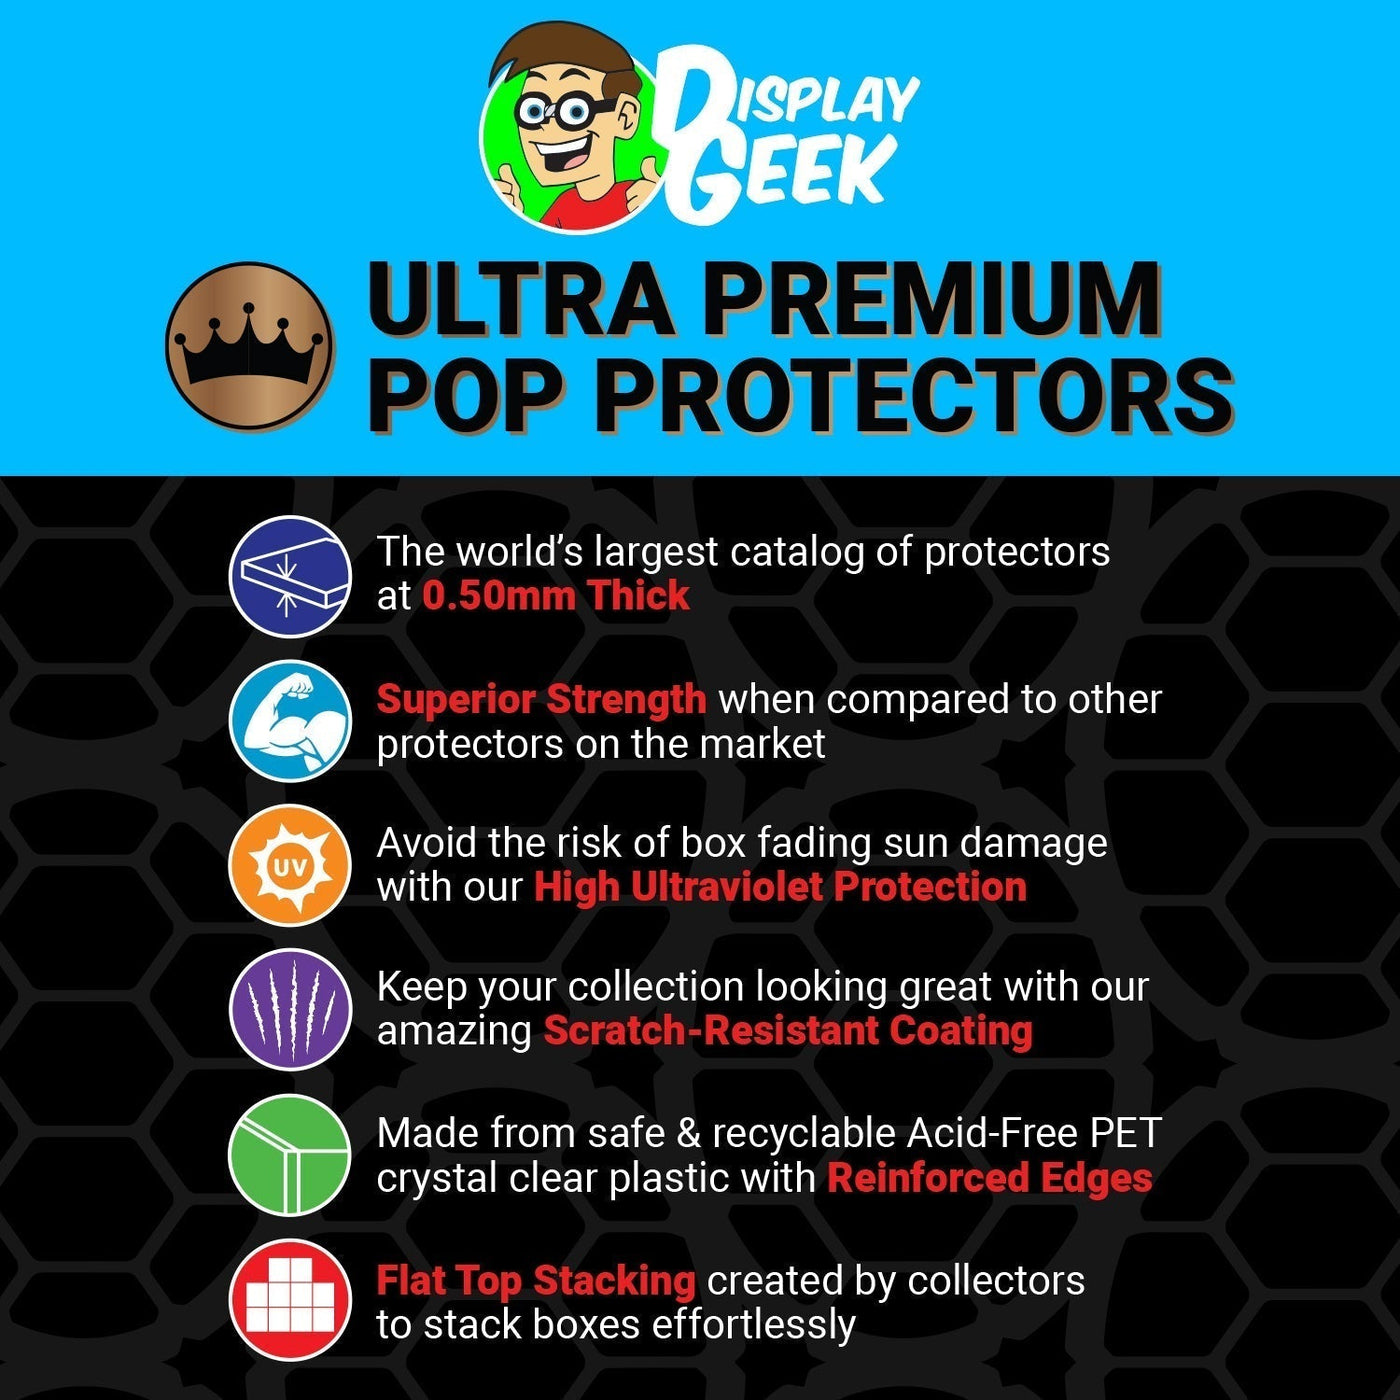 Pop Protector for Ginny Weasley with Flourish & Blotts #139 Funko Pop Deluxe on The Protector Guide App by Display Geek